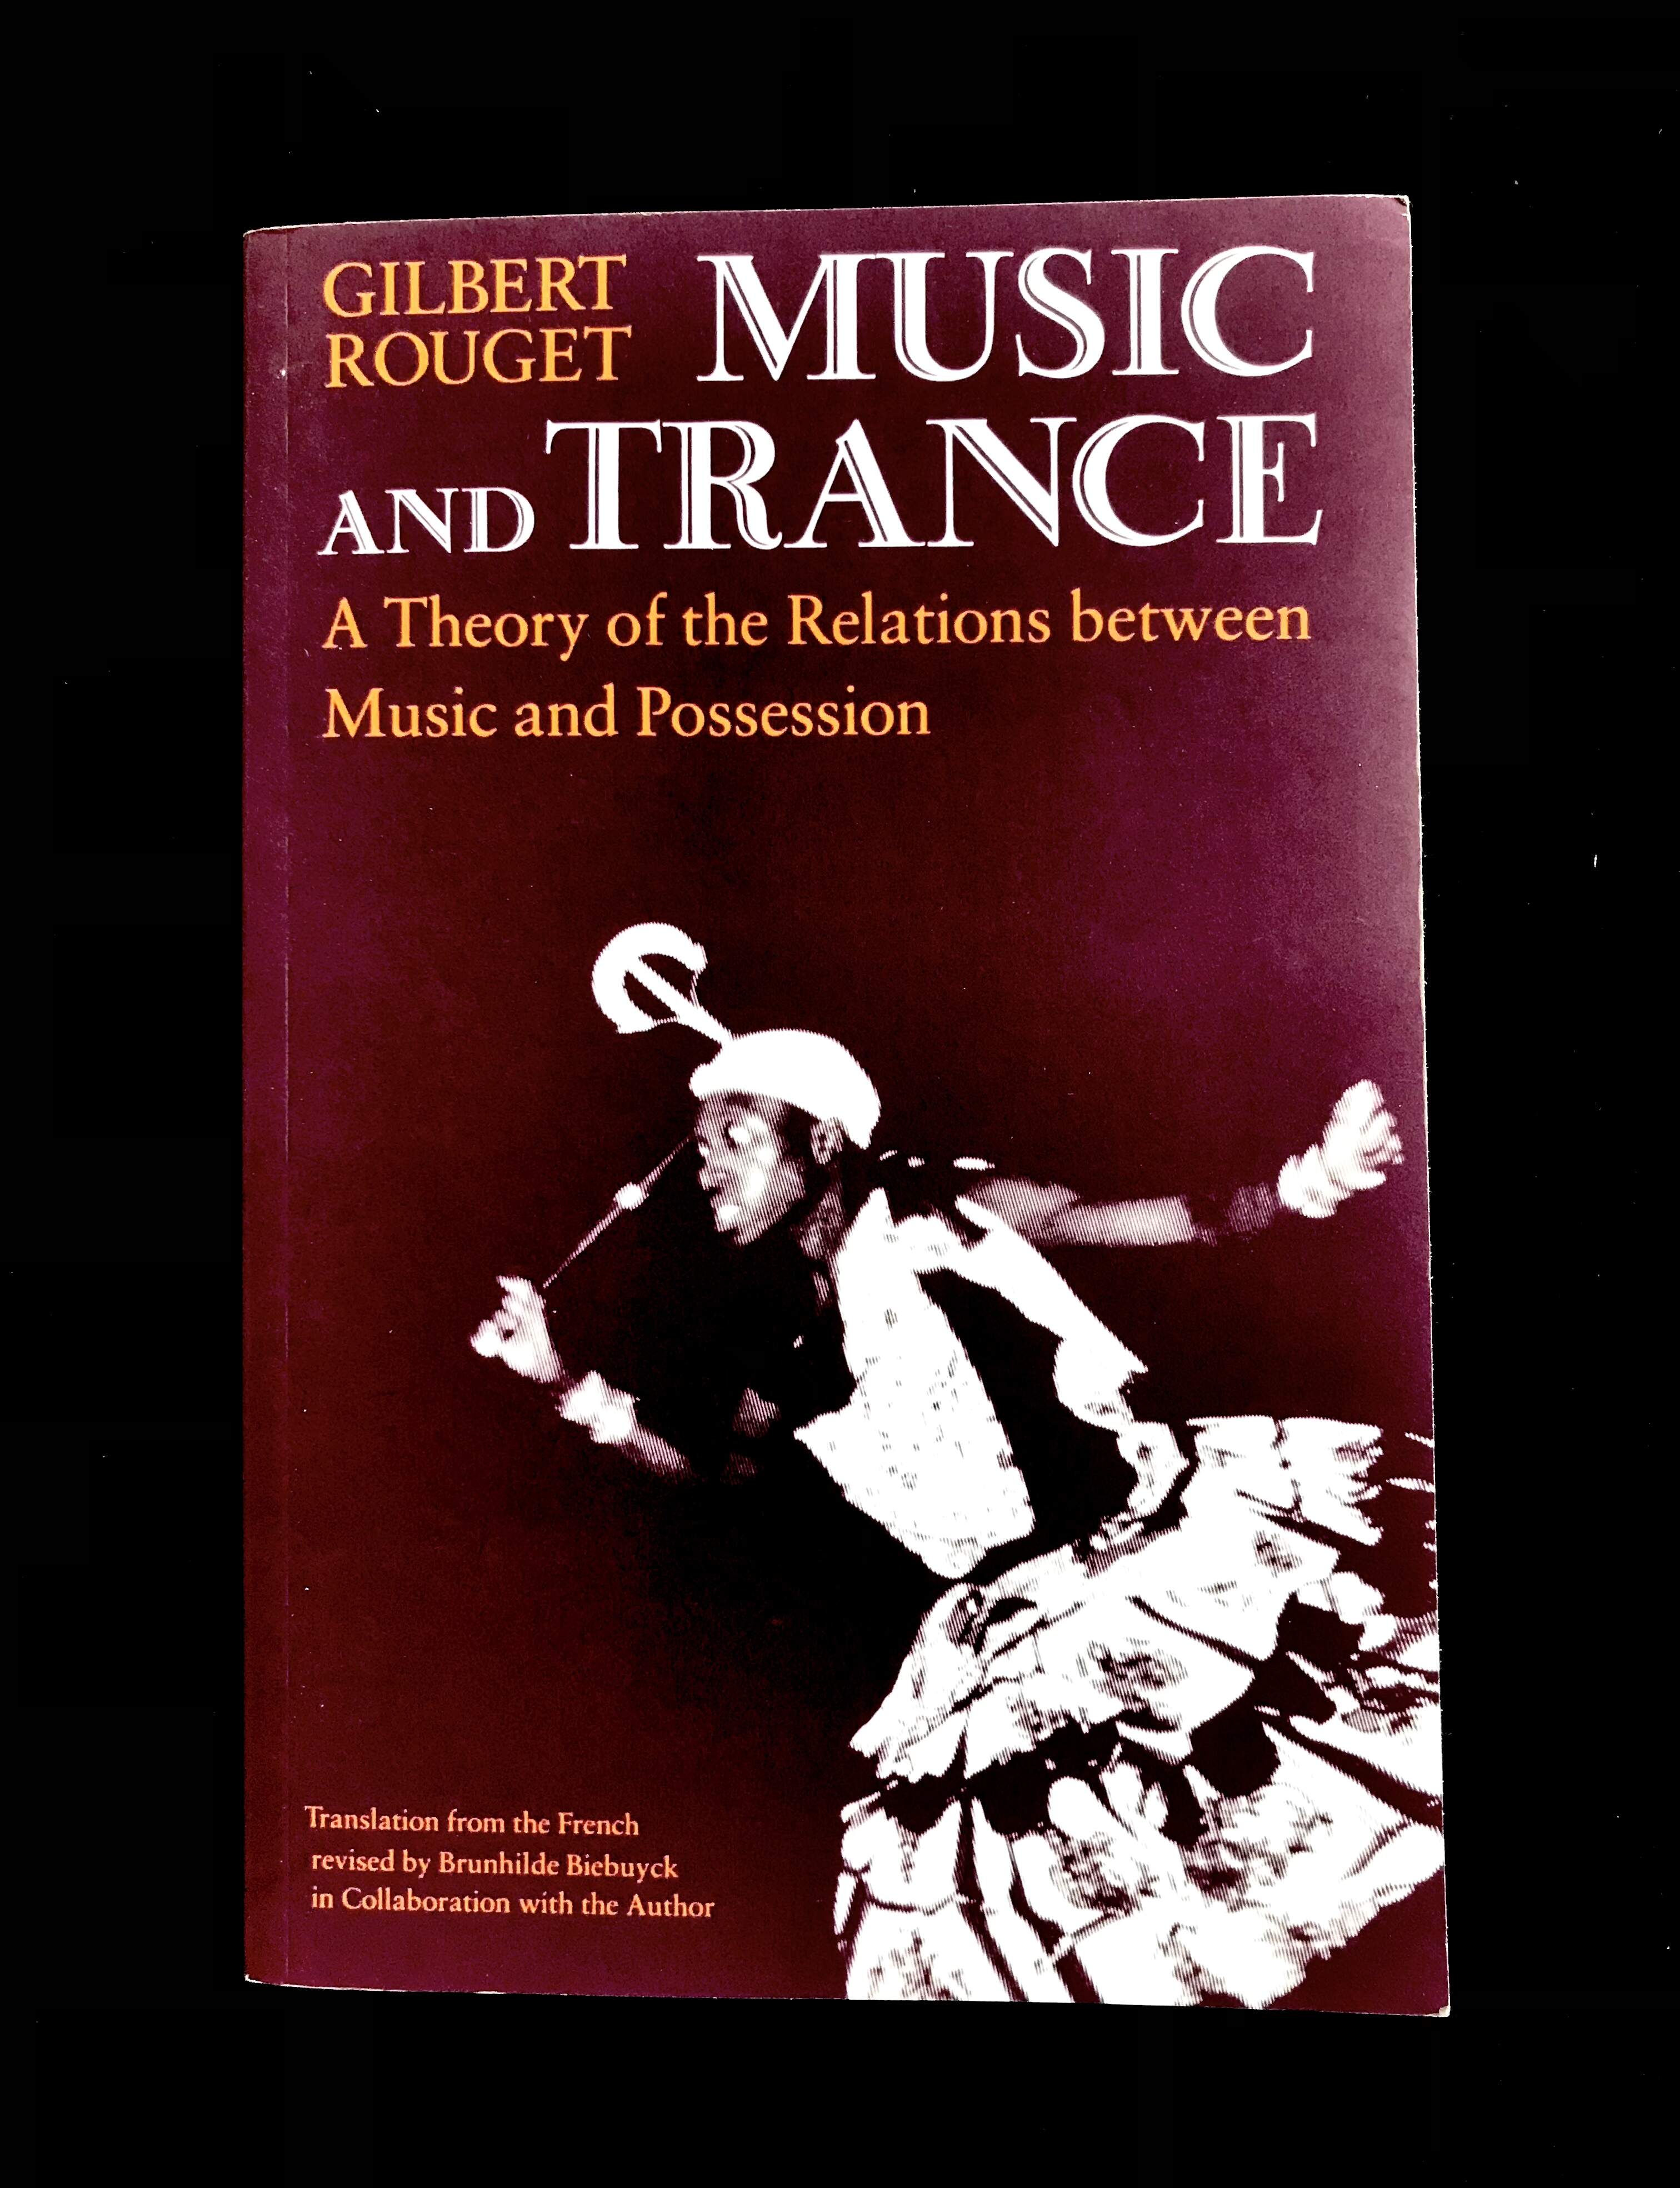 Music and Trance: A Theory of the Relations Between Music and Possession